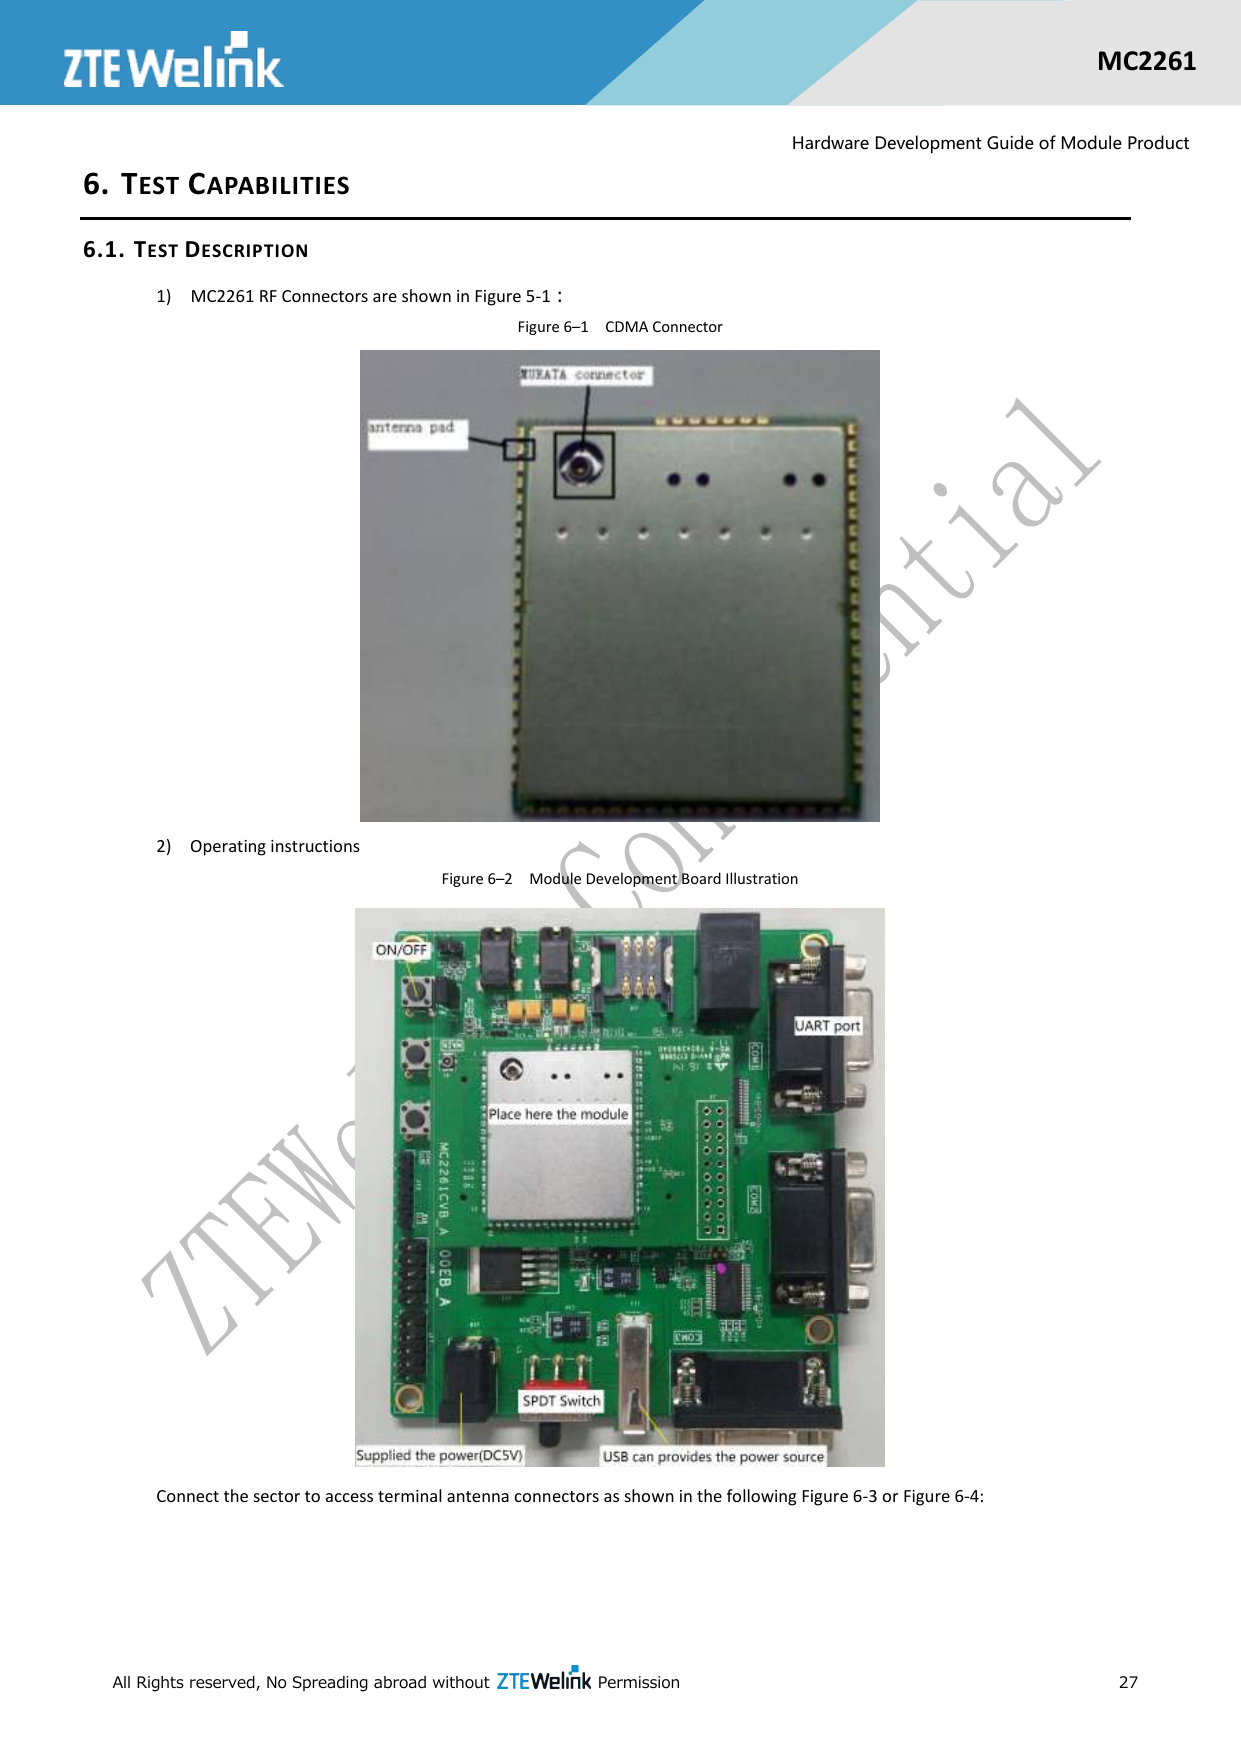  All Rights reserved, No Spreading abroad without    Permission      27  MC2261  Hardware Development Guide of Module Product 6. TEST CAPABILITIES 6.1. TEST DESCRIPTION 1)    MC2261 RF Connectors are shown in Figure 5-1： Figure 6–1  CDMA Connector  2)    Operating instructions Figure 6–2  Module Development Board Illustration  Connect the sector to access terminal antenna connectors as shown in the following Figure 6-3 or Figure 6-4:   